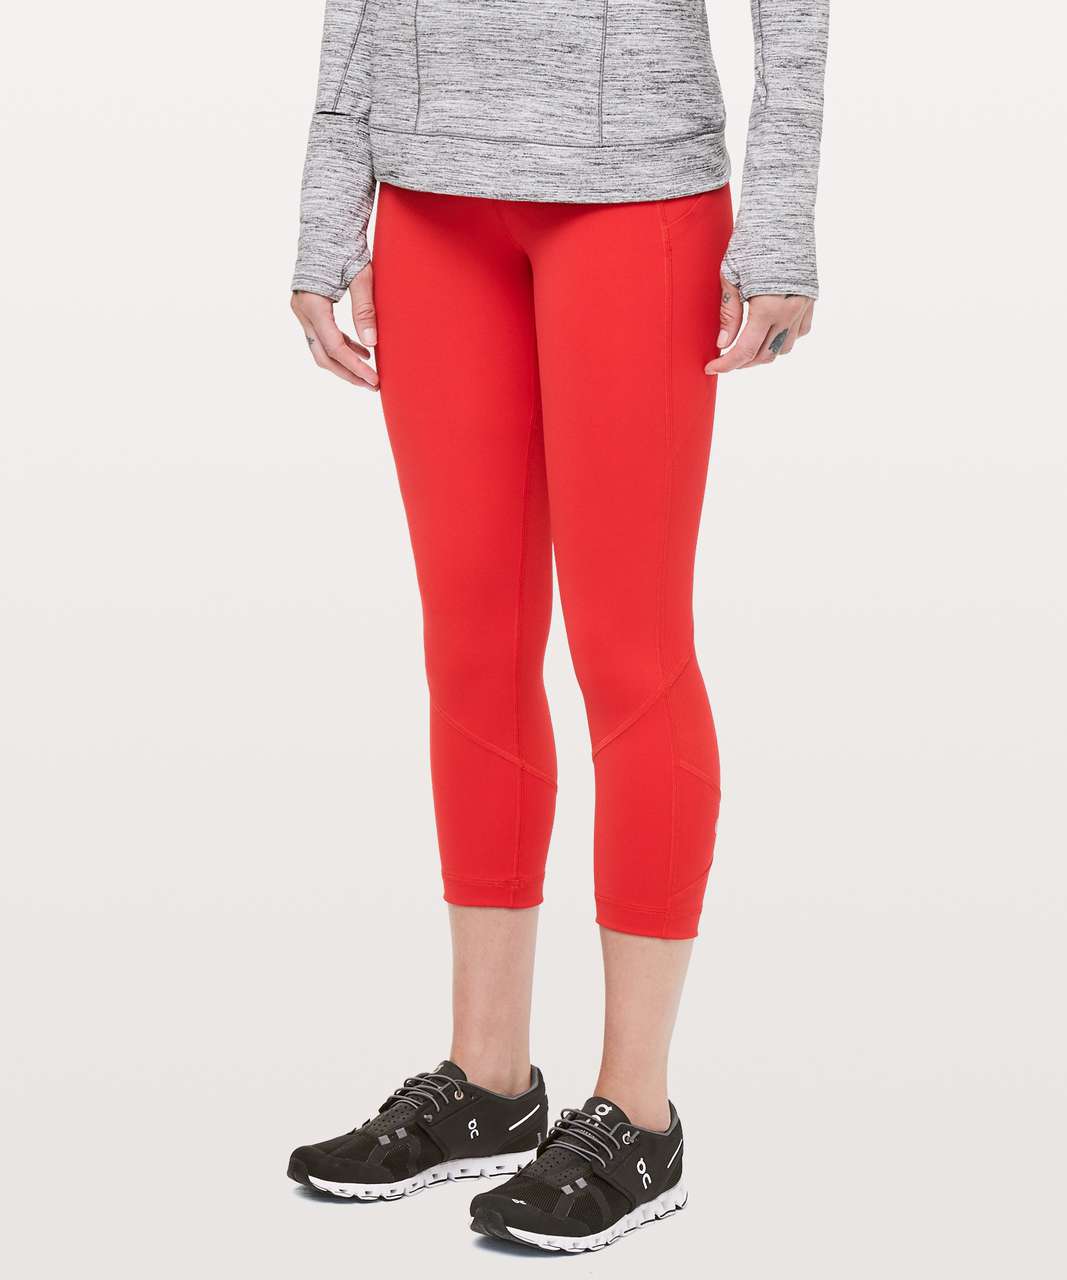 Lululemon Pace Rival Crop *Full-On Luxtreme 22" - True Red